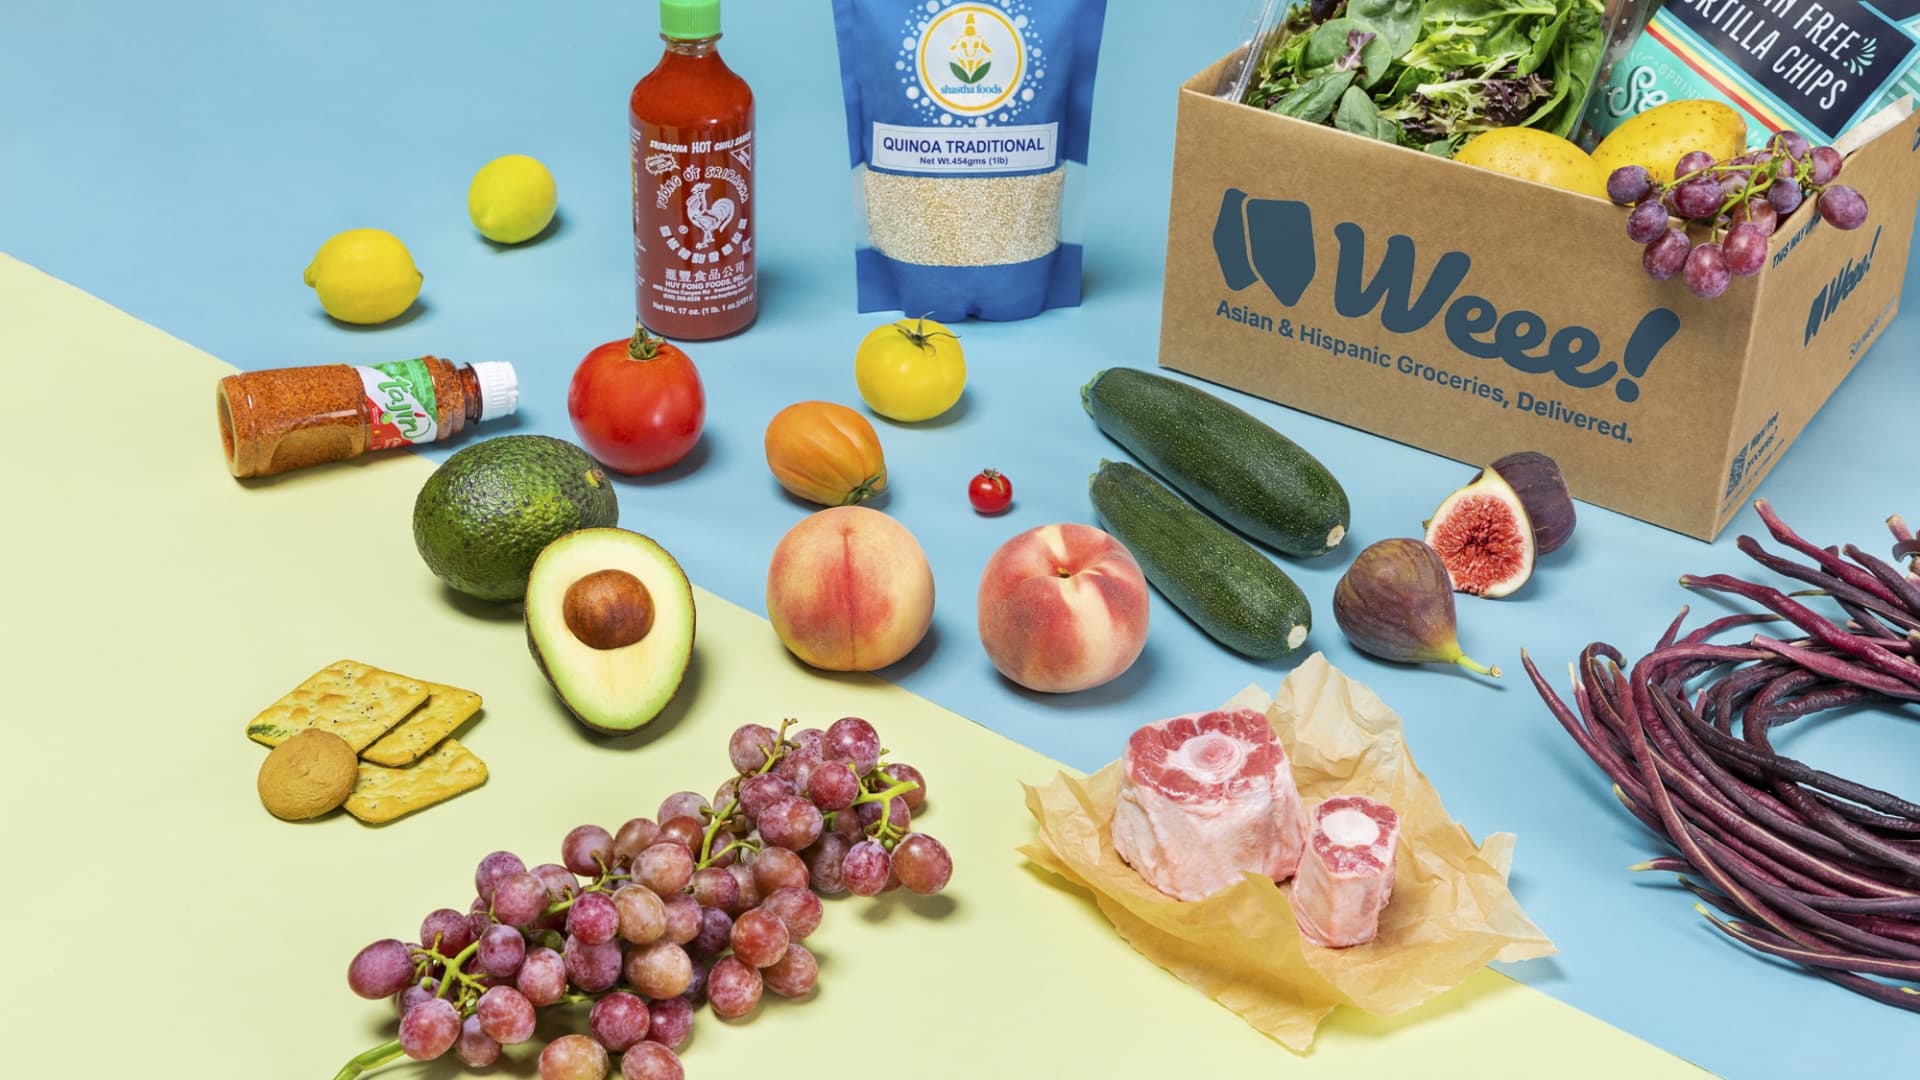 Asian grocery start-up Weee! lures shoppers with tradition, tech and a dash of Hollywood